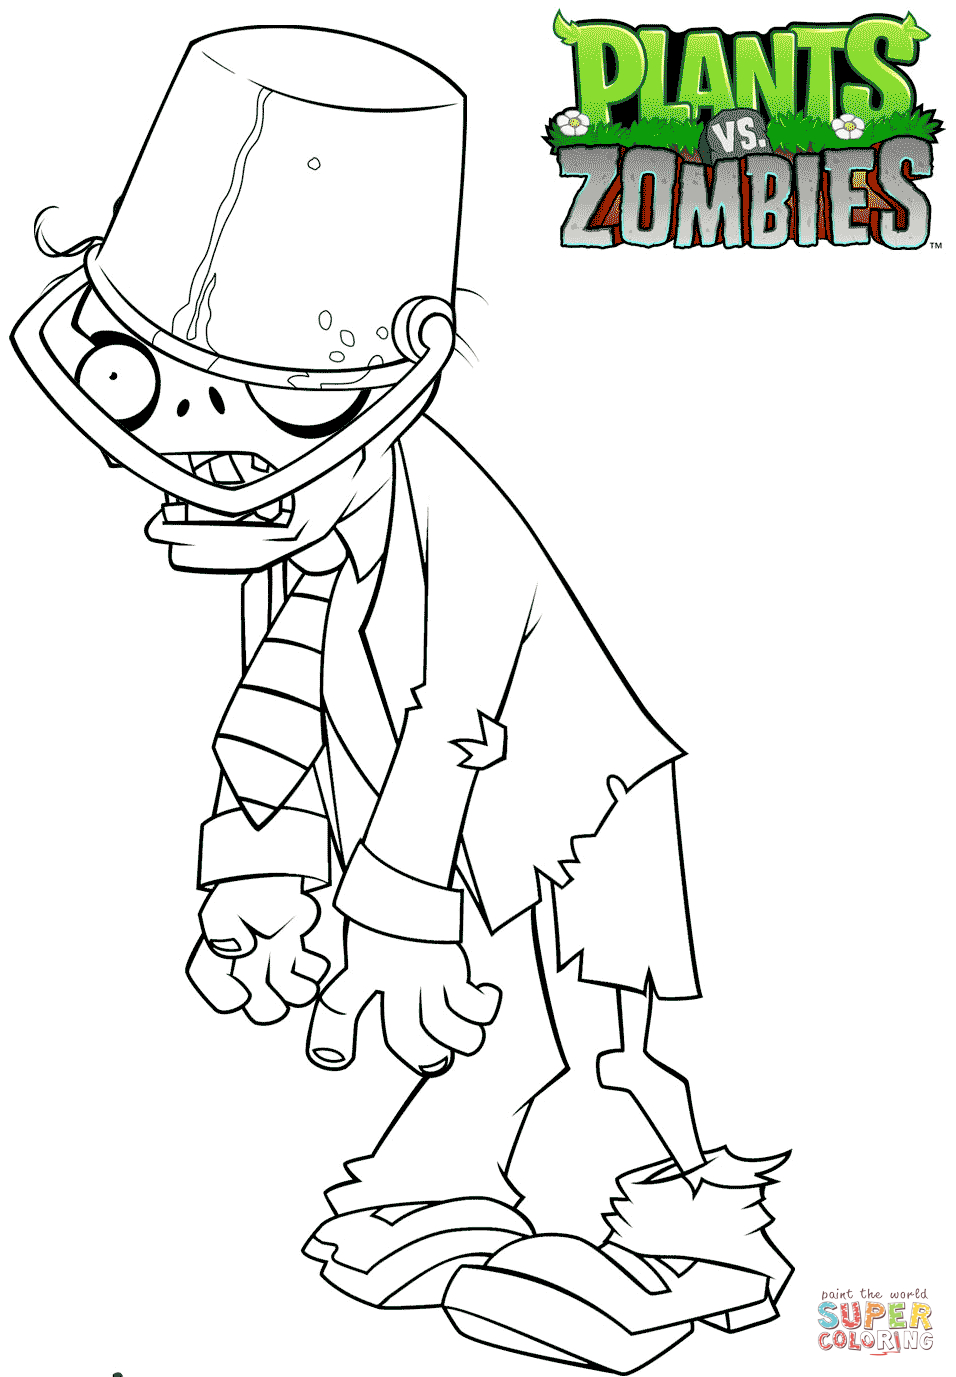 Plants Vs Zombie Coloring Pages Plants Vs Zombies Buckethead Zombie Coloring Page Free Printable